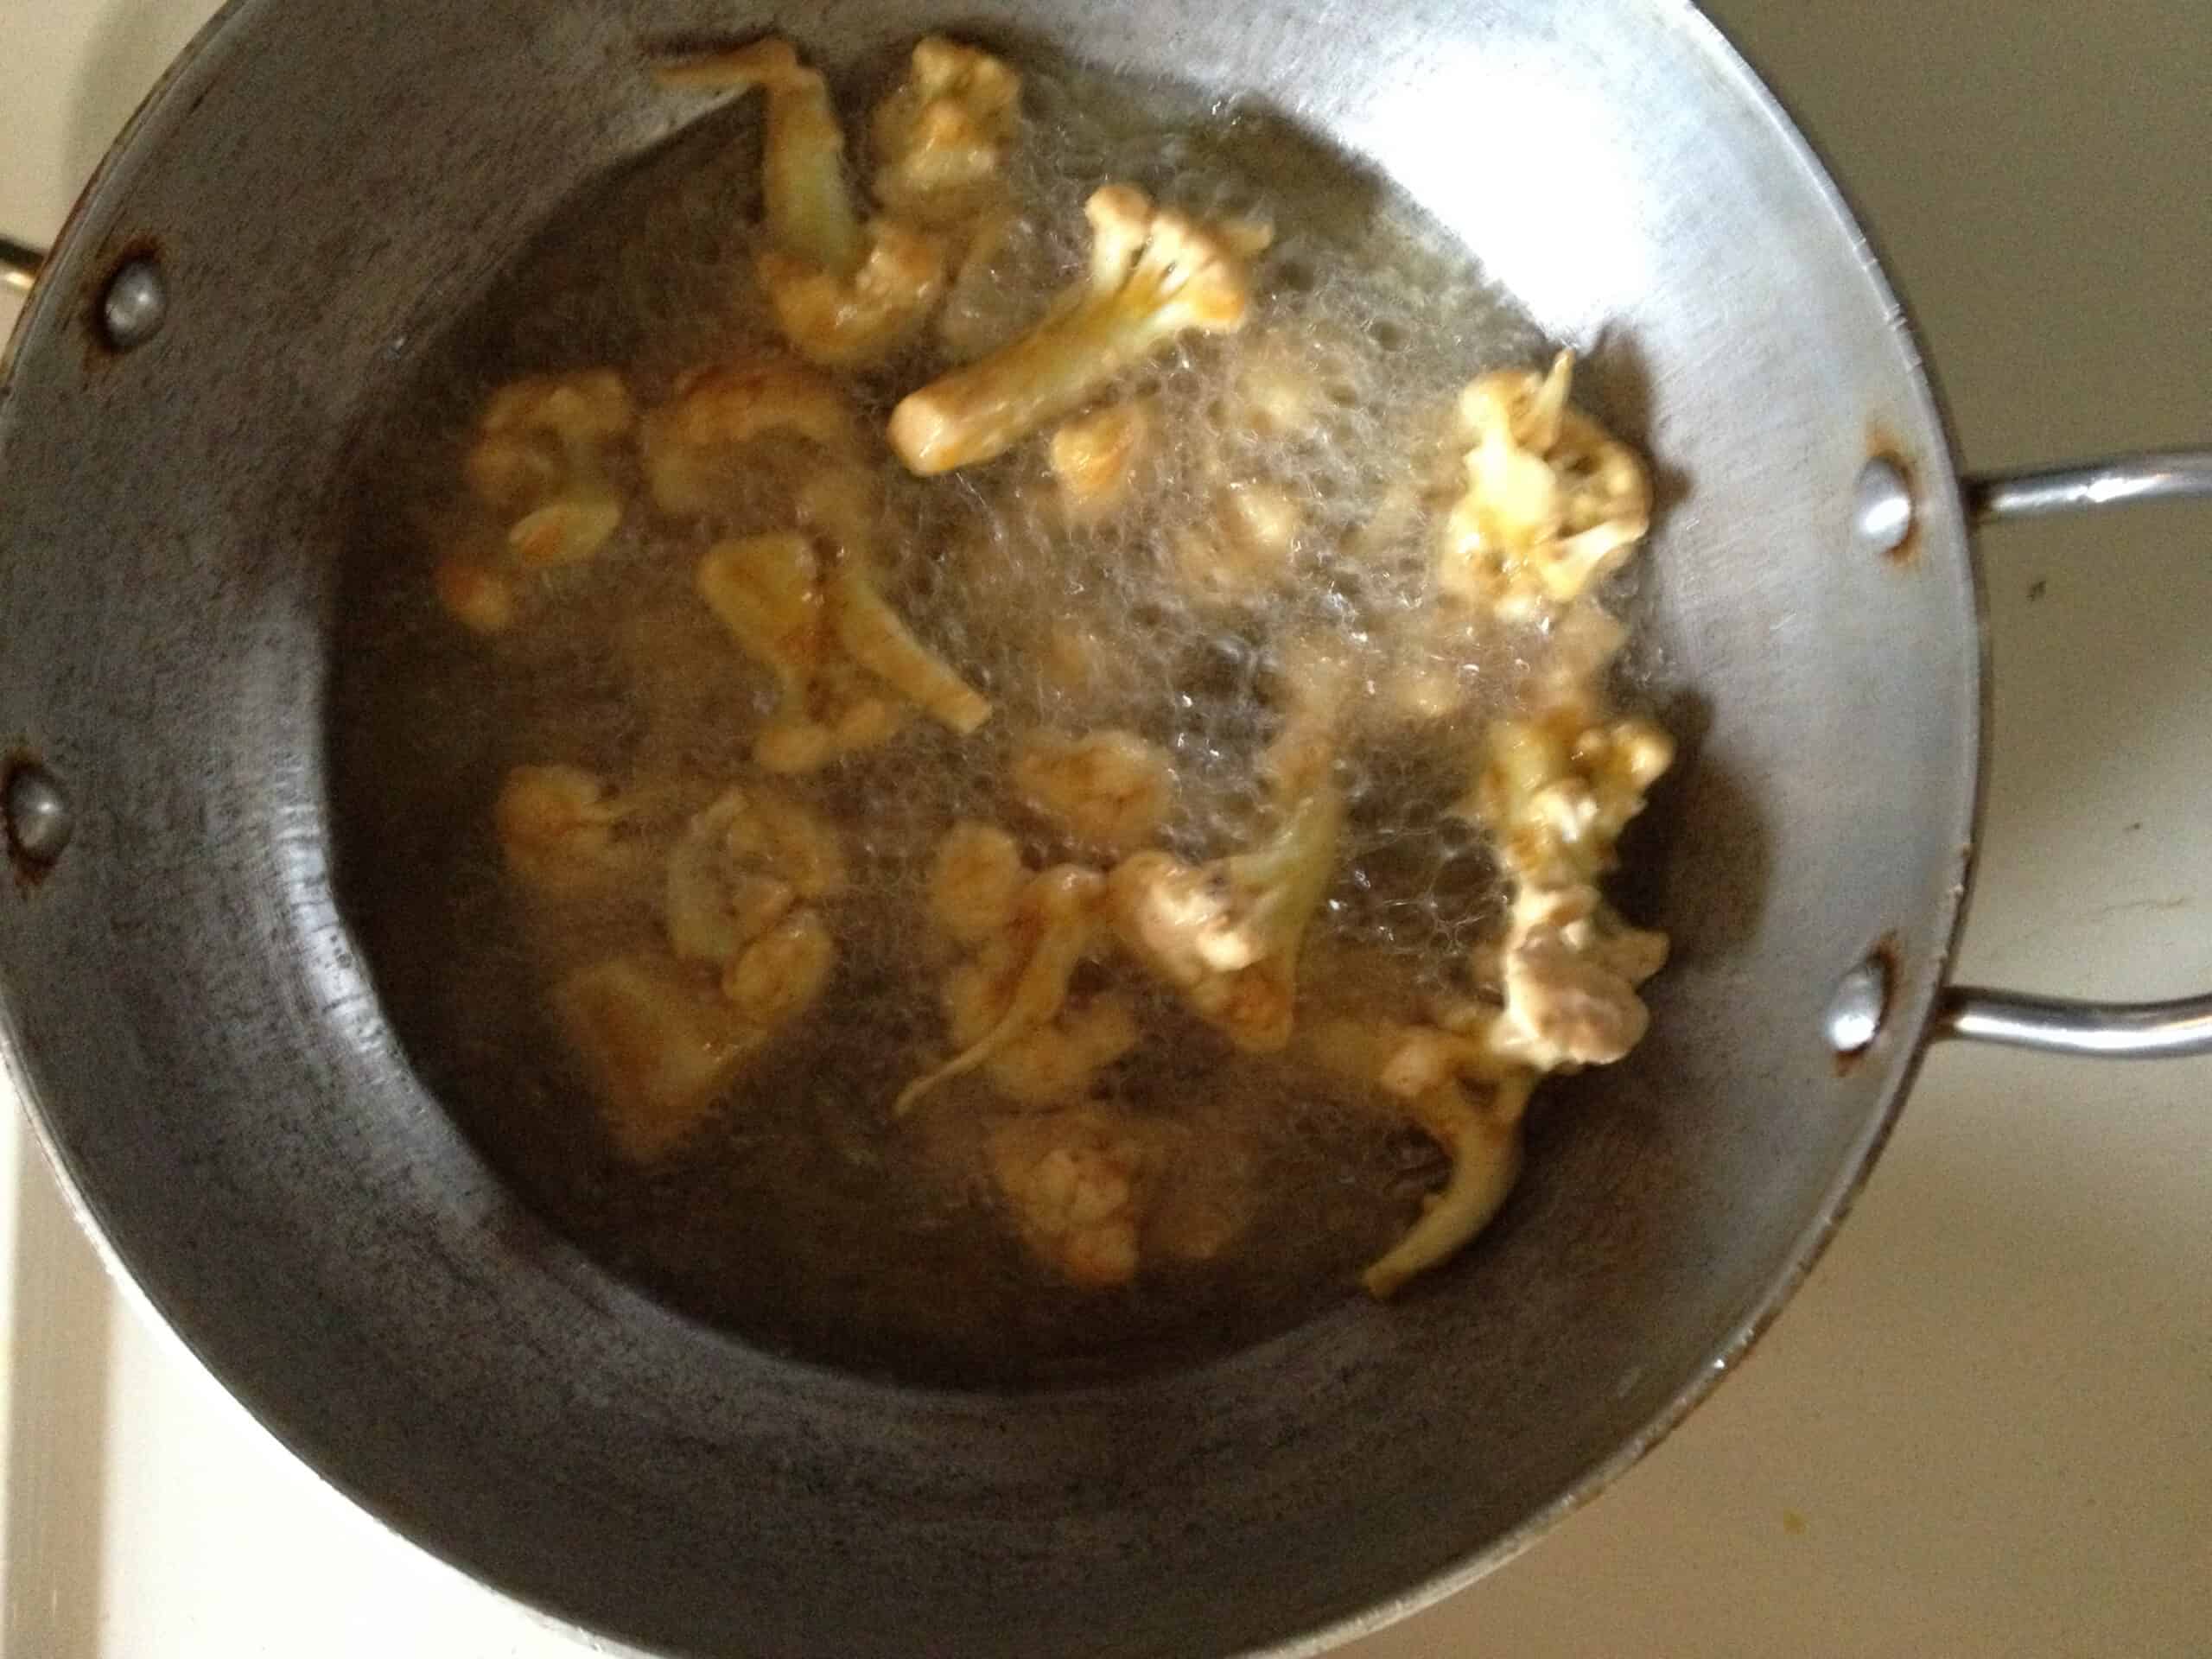 frying the florets in the oil